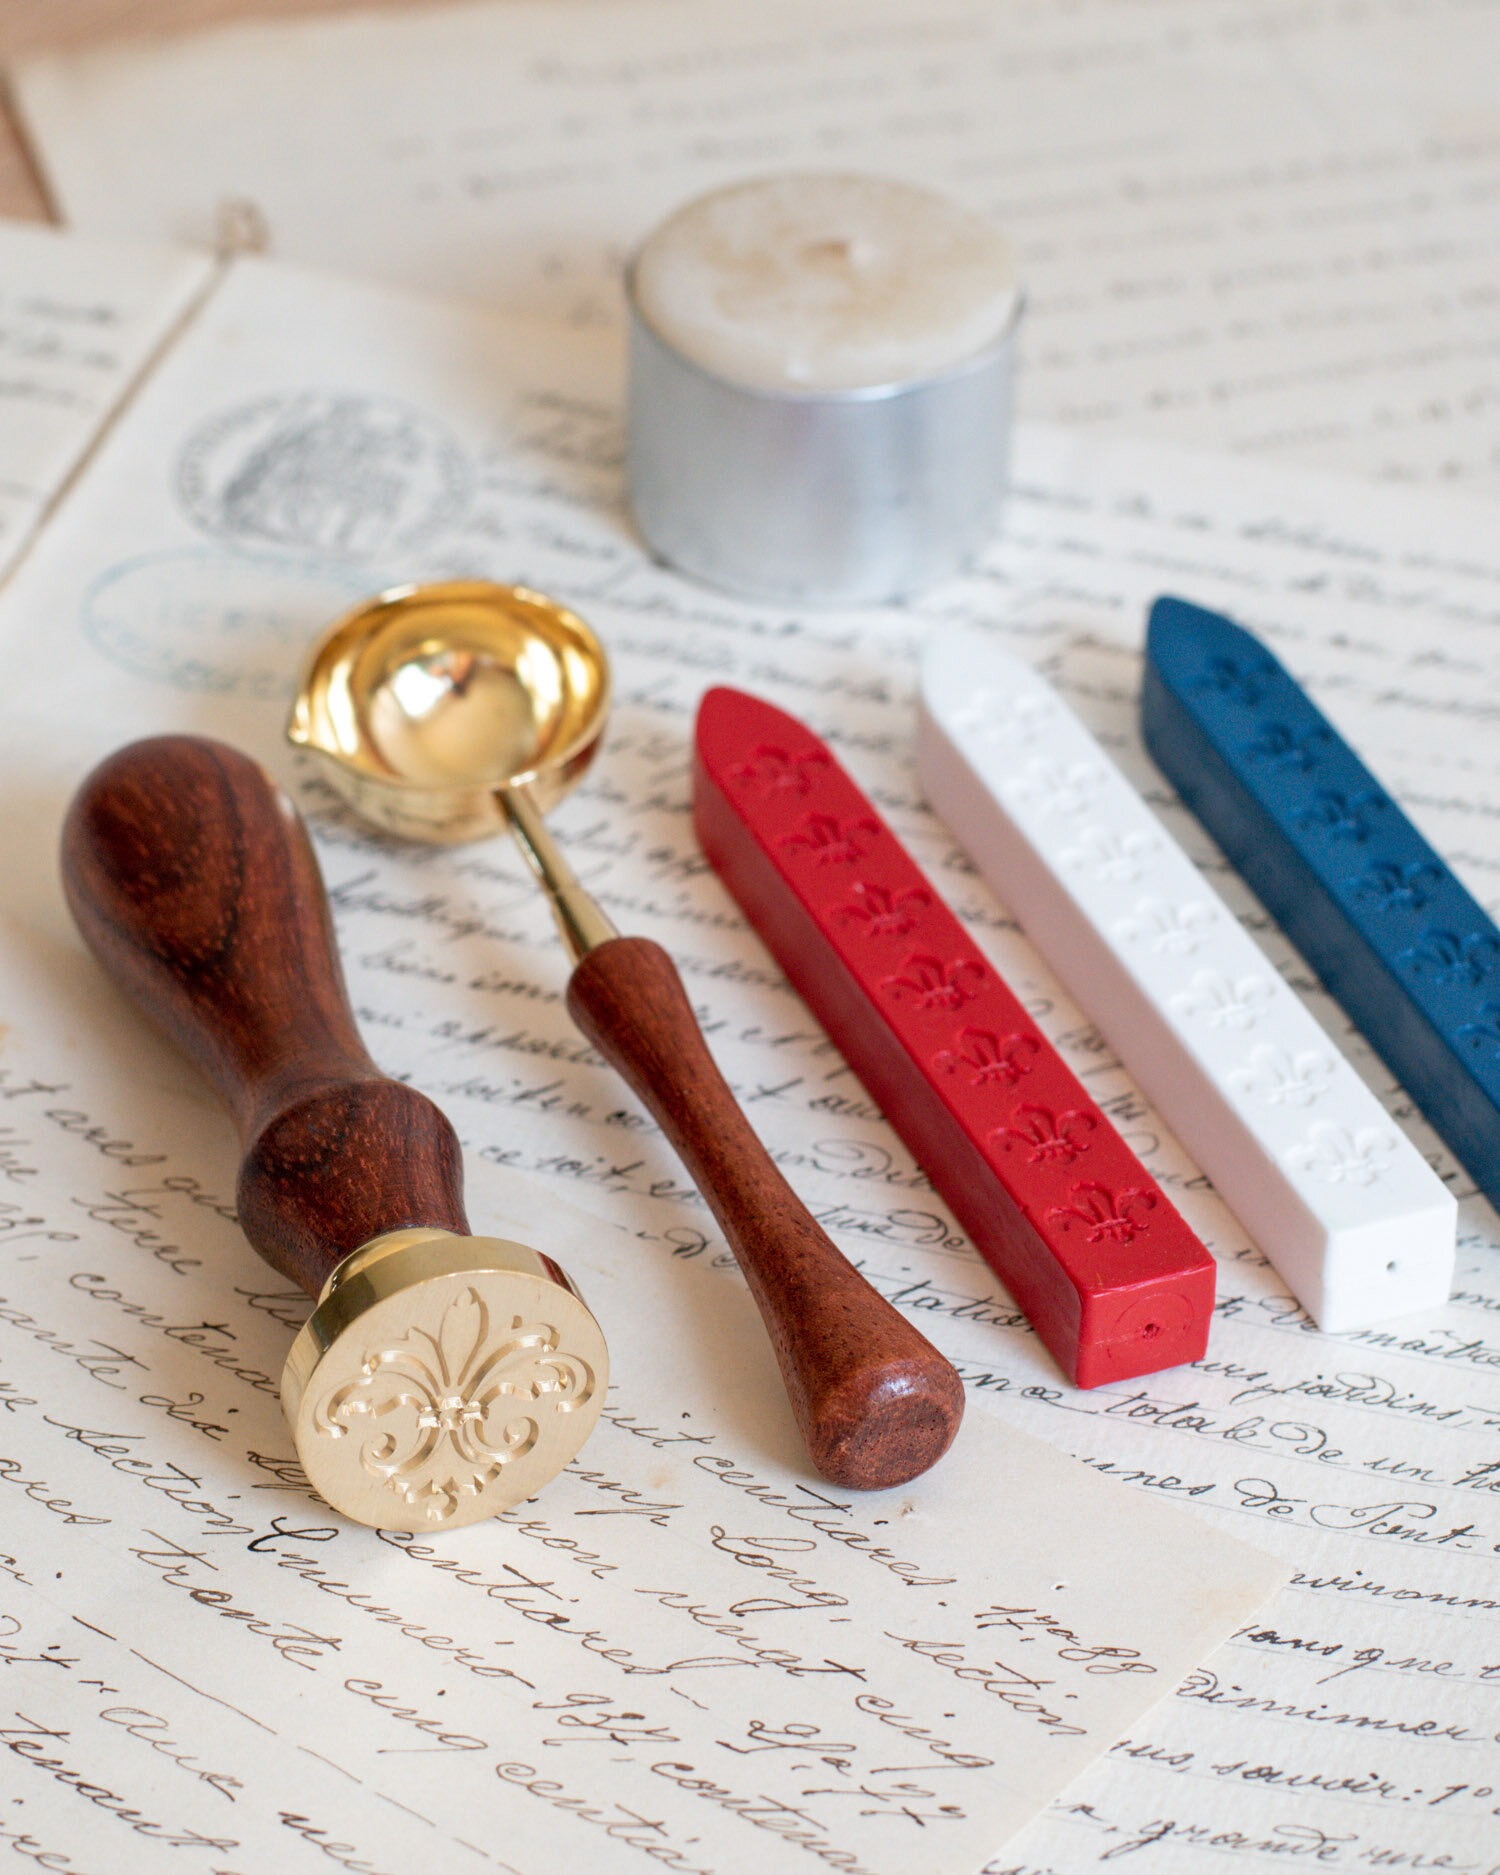 Forget Me Not Wax Seal Kit – Kathryn Hastings & Co.